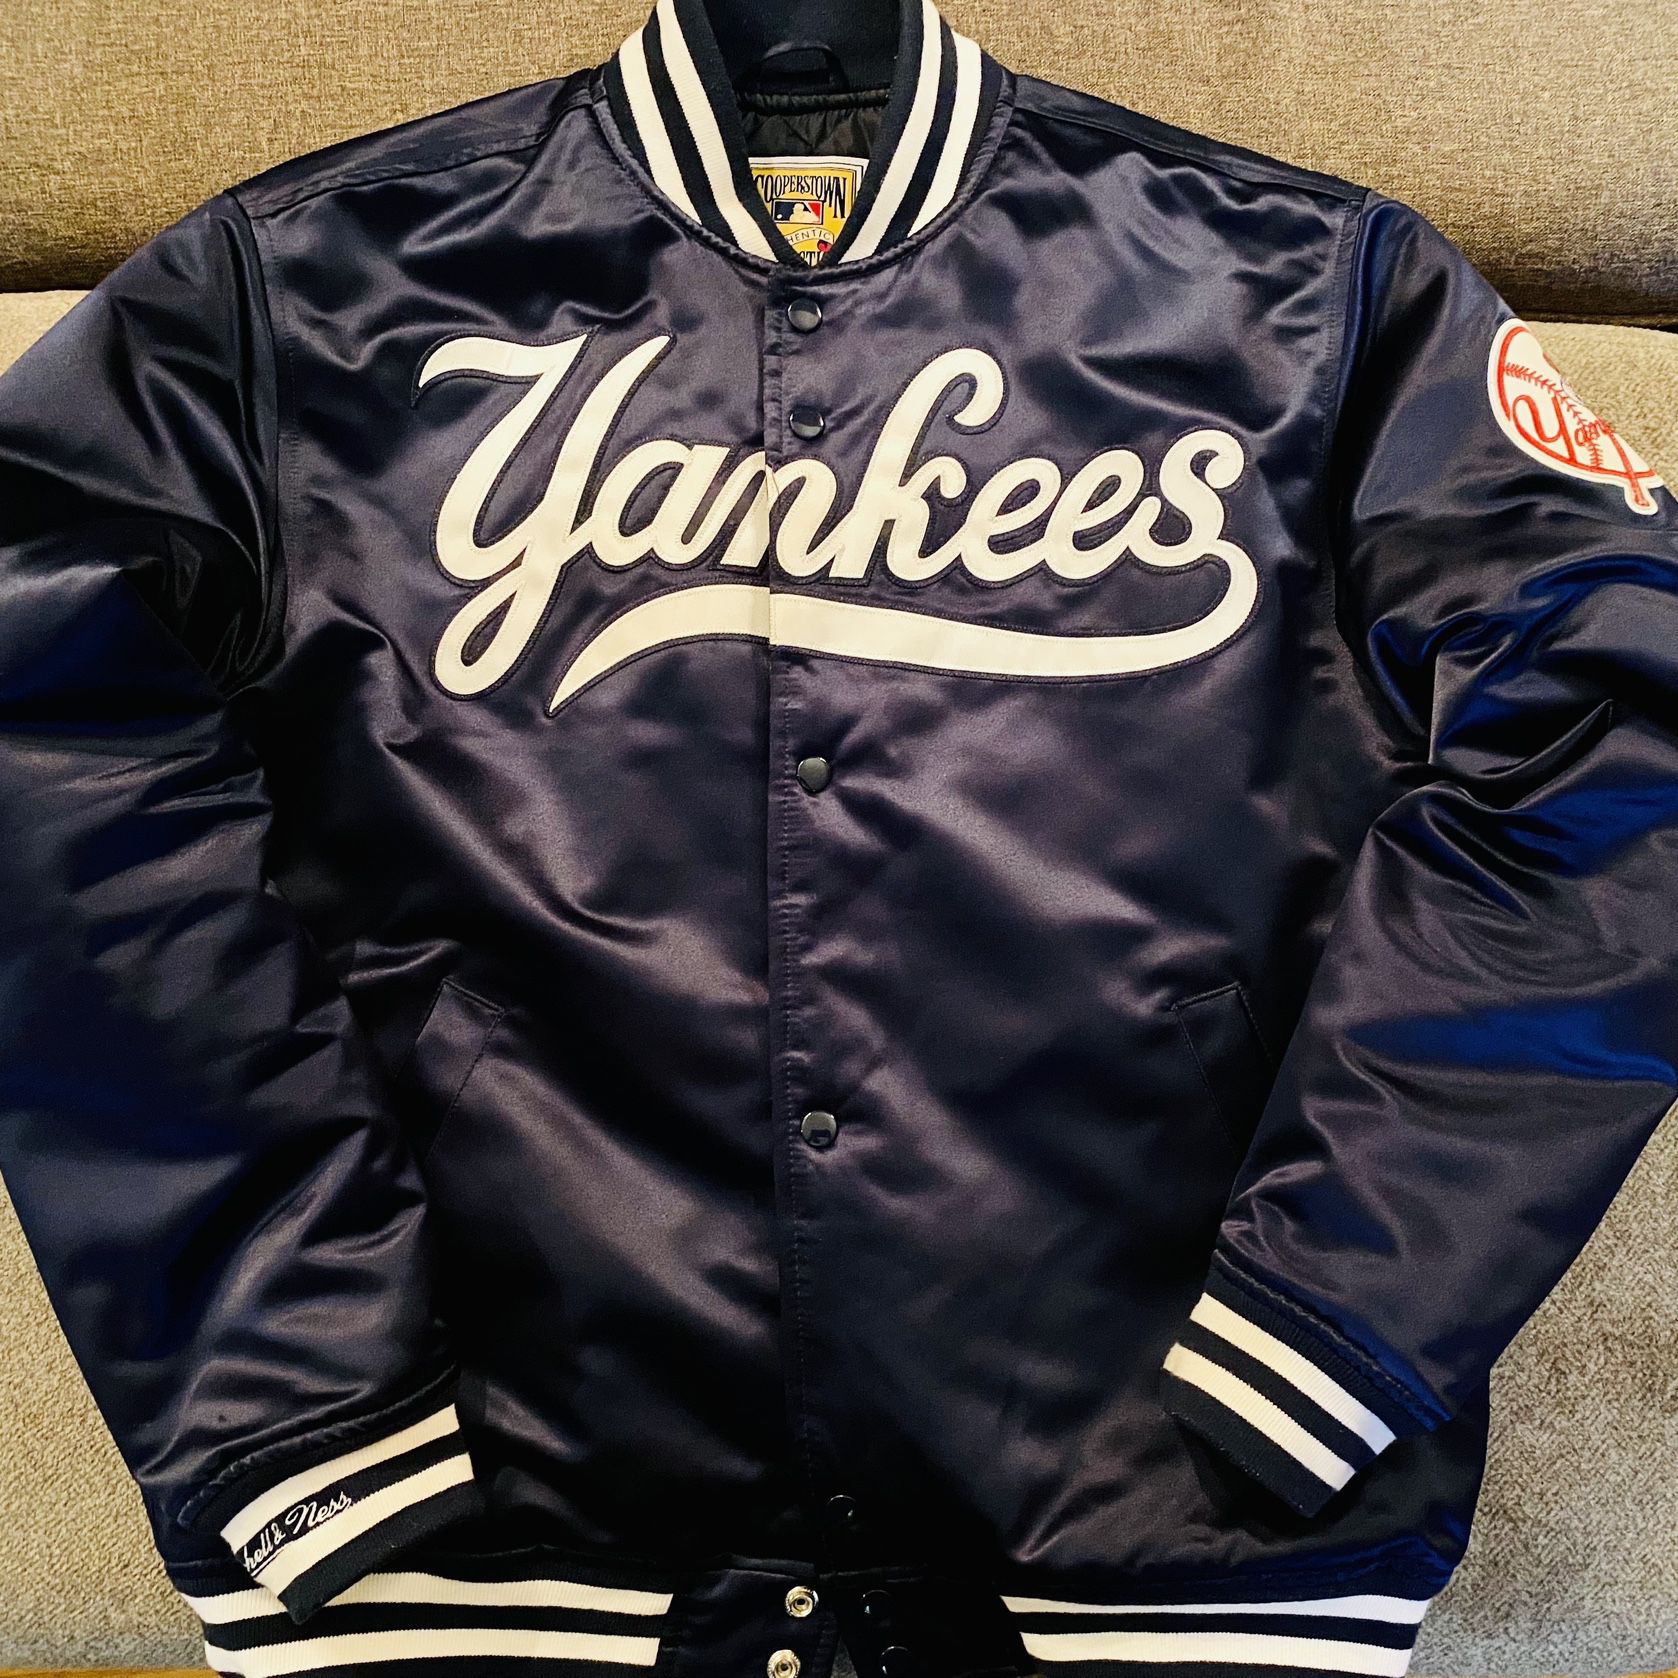 Mitchell&ness 1999 New York Yankees Satin Jacket Size Medium for Sale in  Yonkers, NY - OfferUp